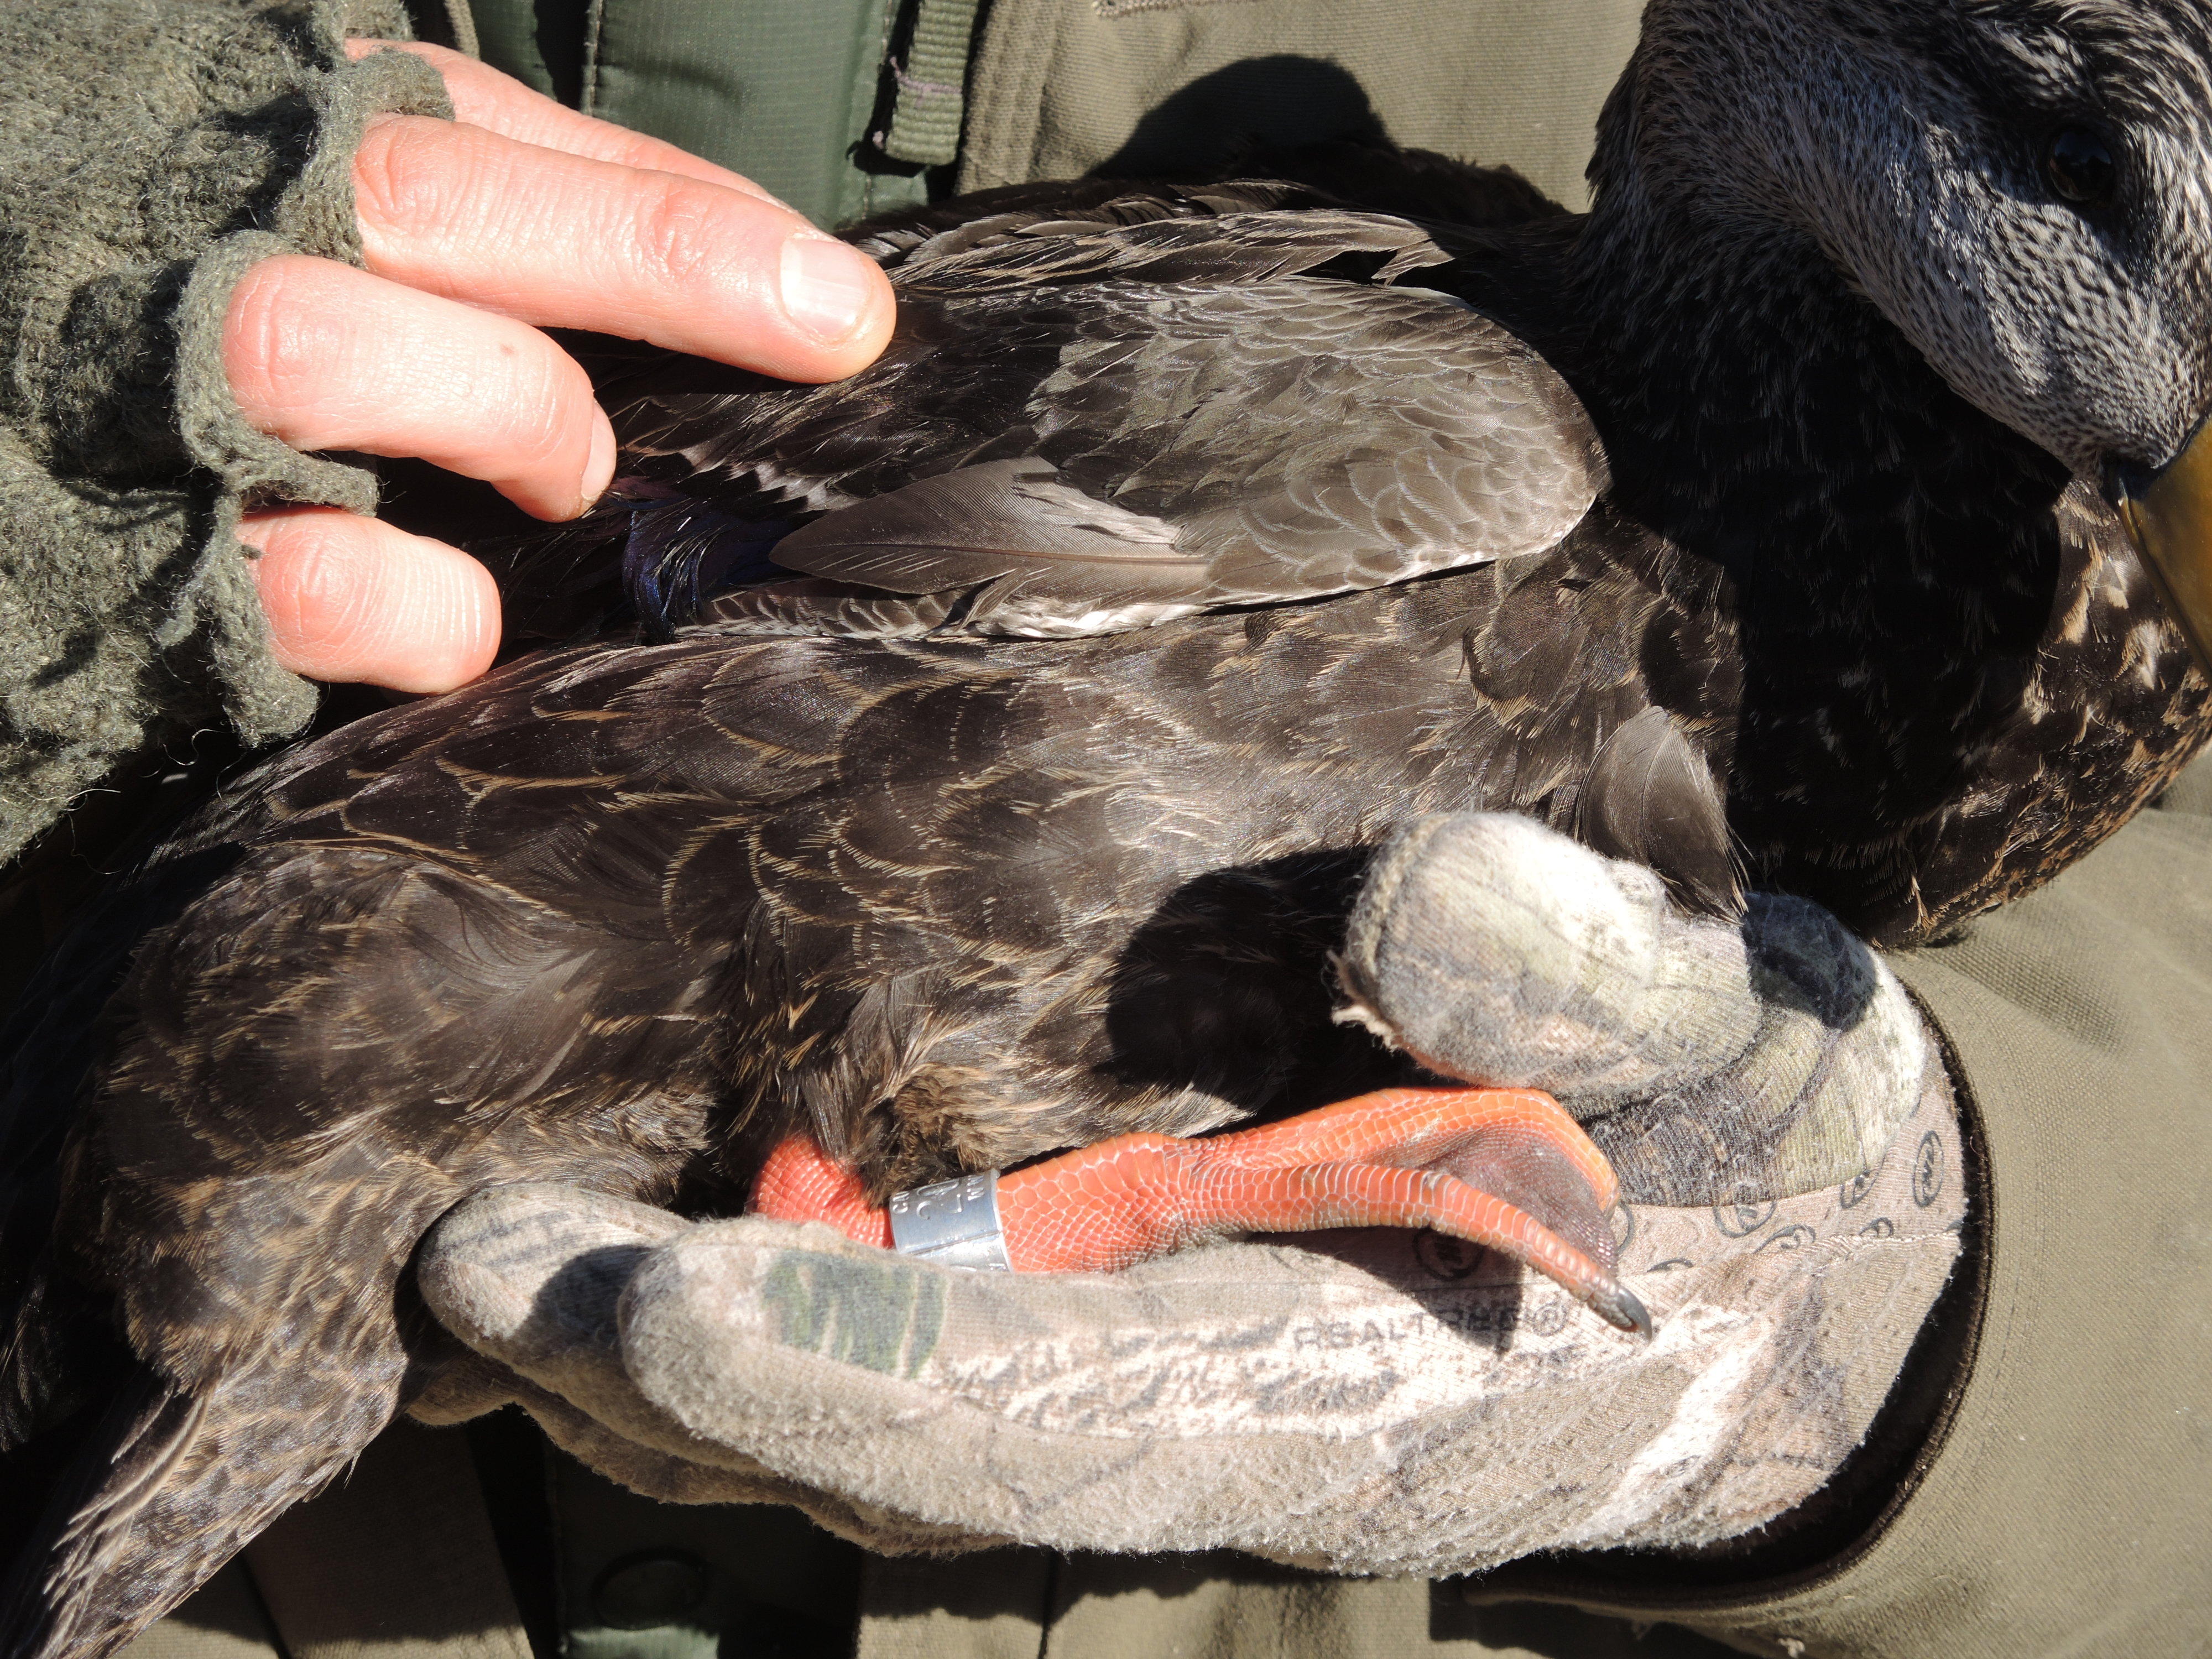 The numbered band on this duck will allow biologists to track this duck and provide valuable information on such things as migration routes and mortality.